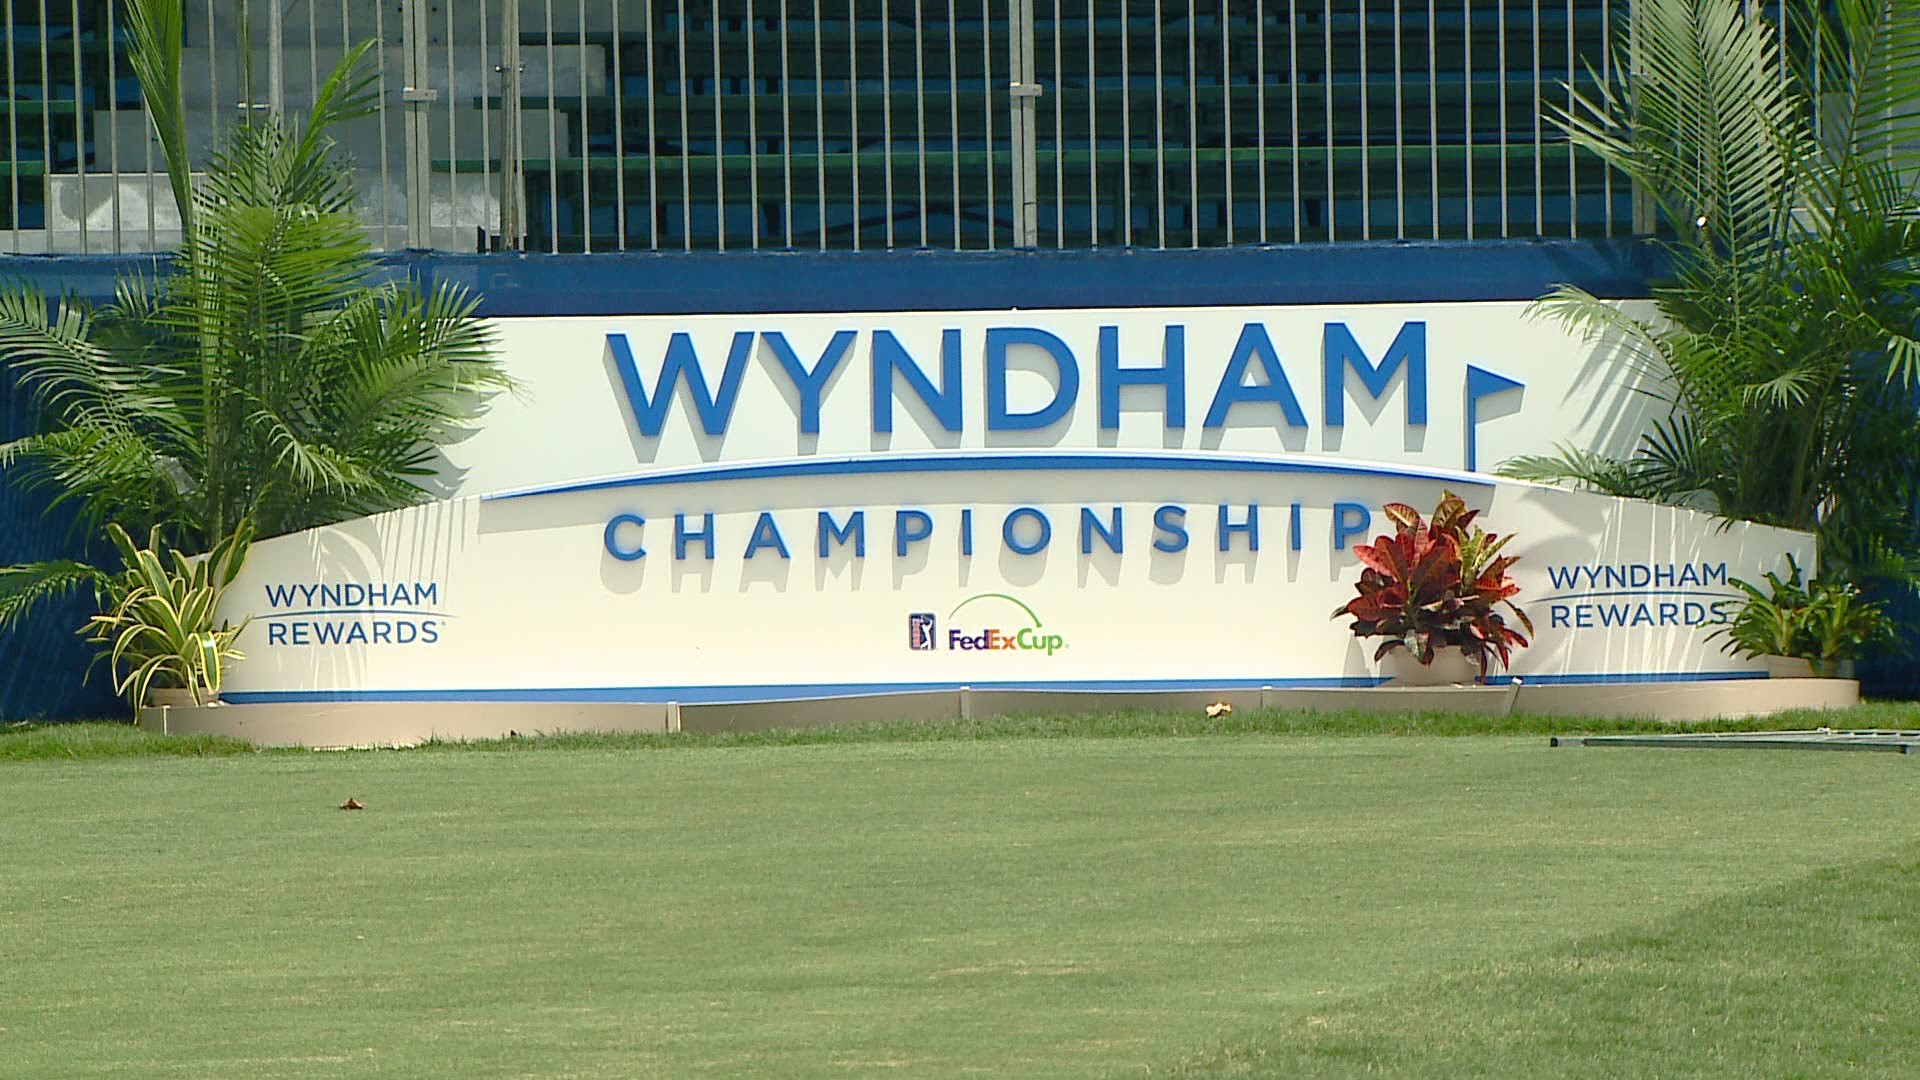 Round One of the 2019 Wyndham Championship is set for Thursday